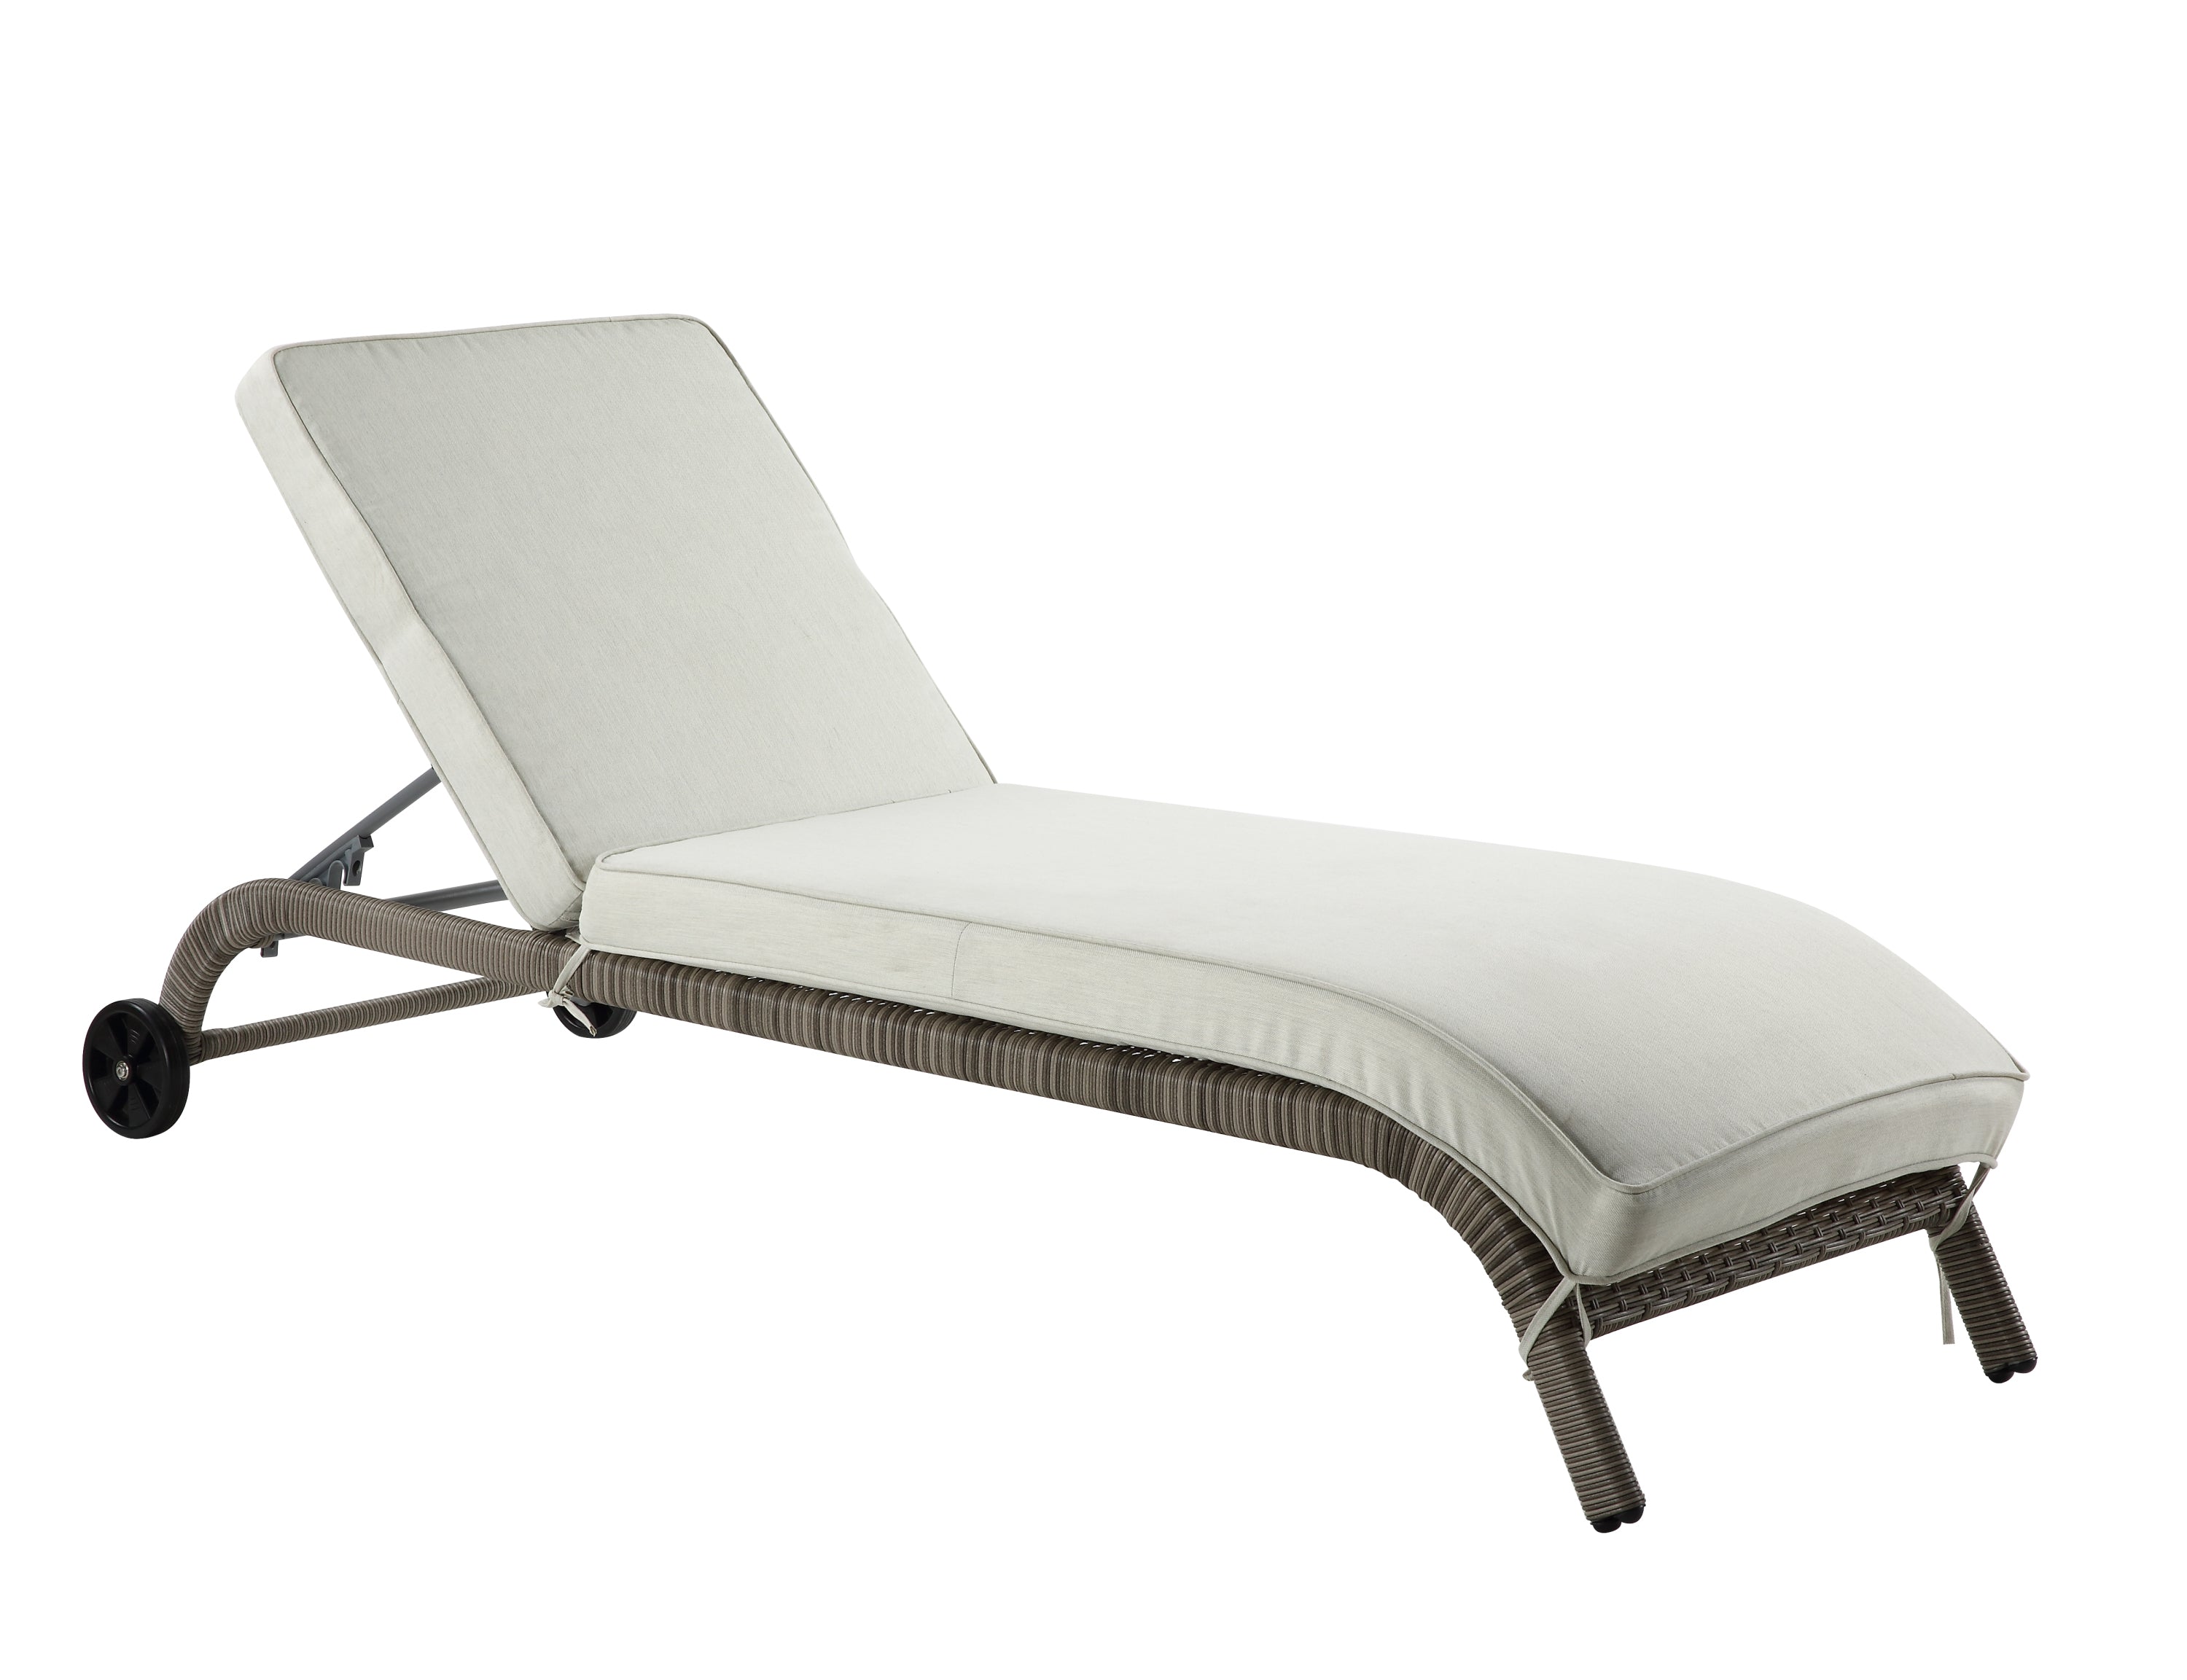 Salena Patio Sun Lounge with Whell - Beige